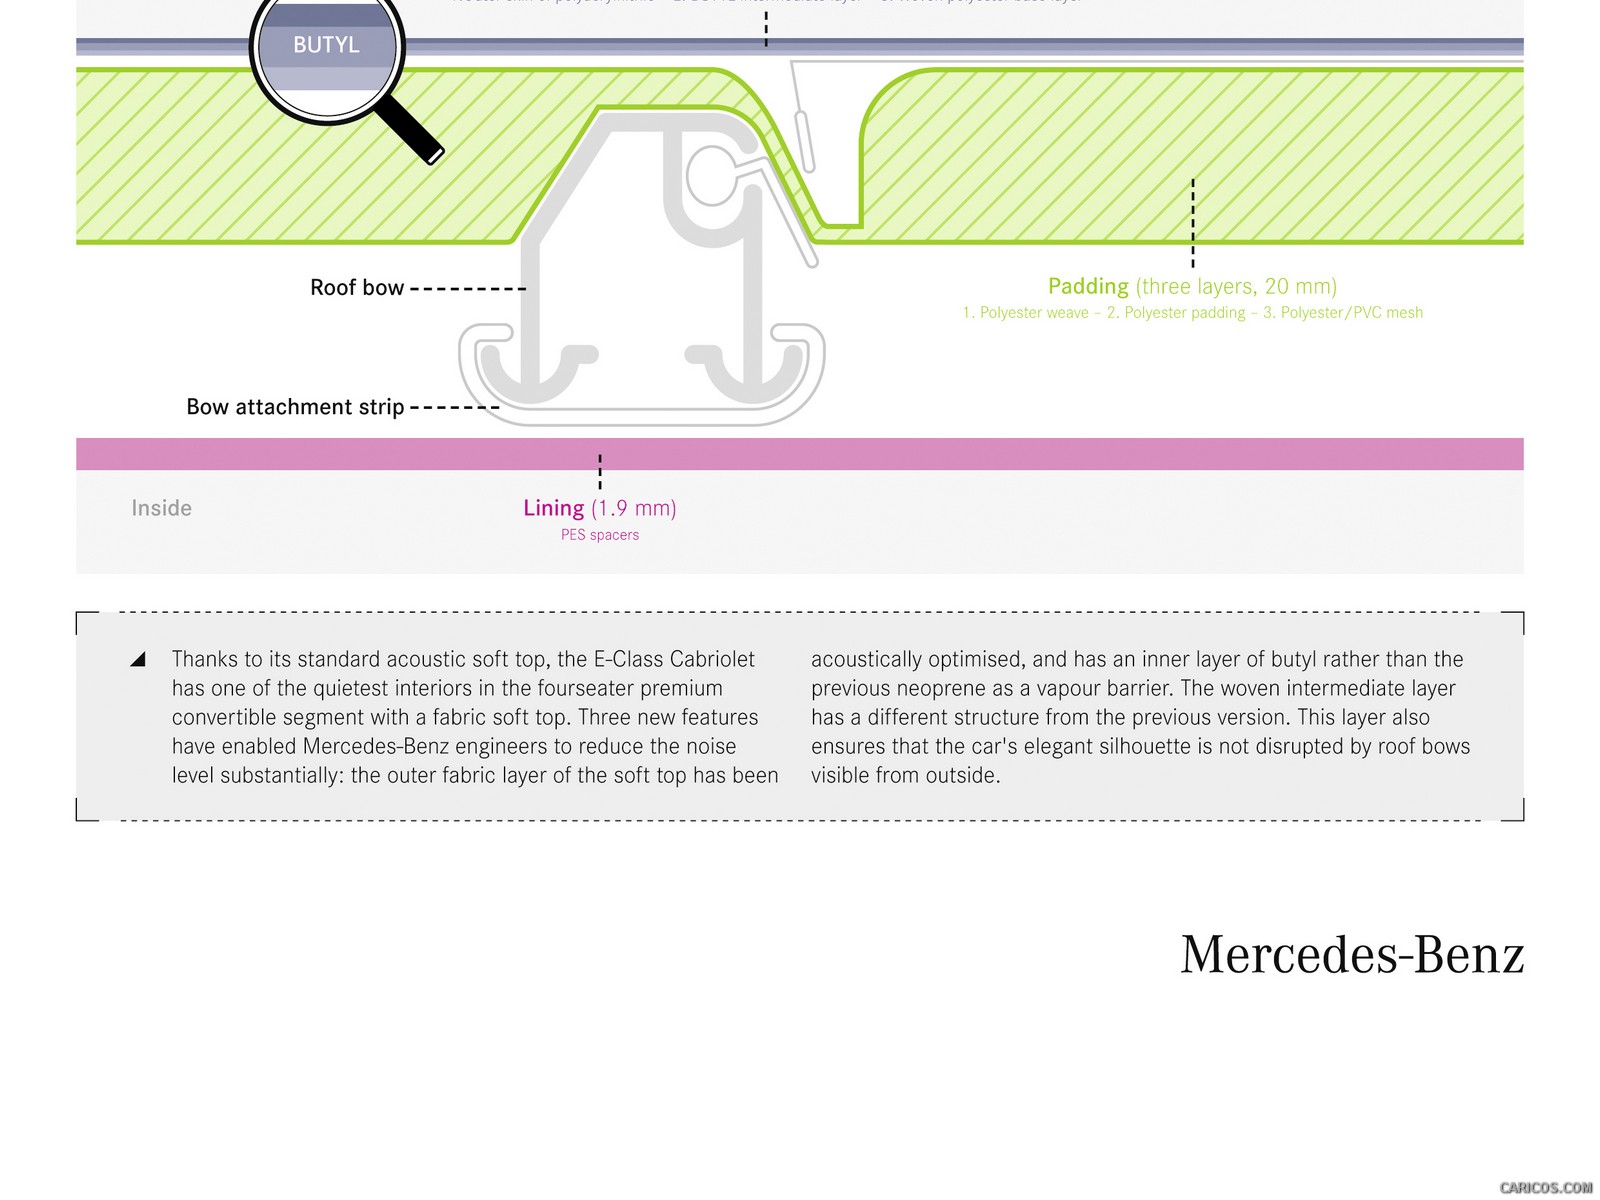 Mercedes-Benz E-Class Cabriolet  - Technical Drawing, #120 of 165